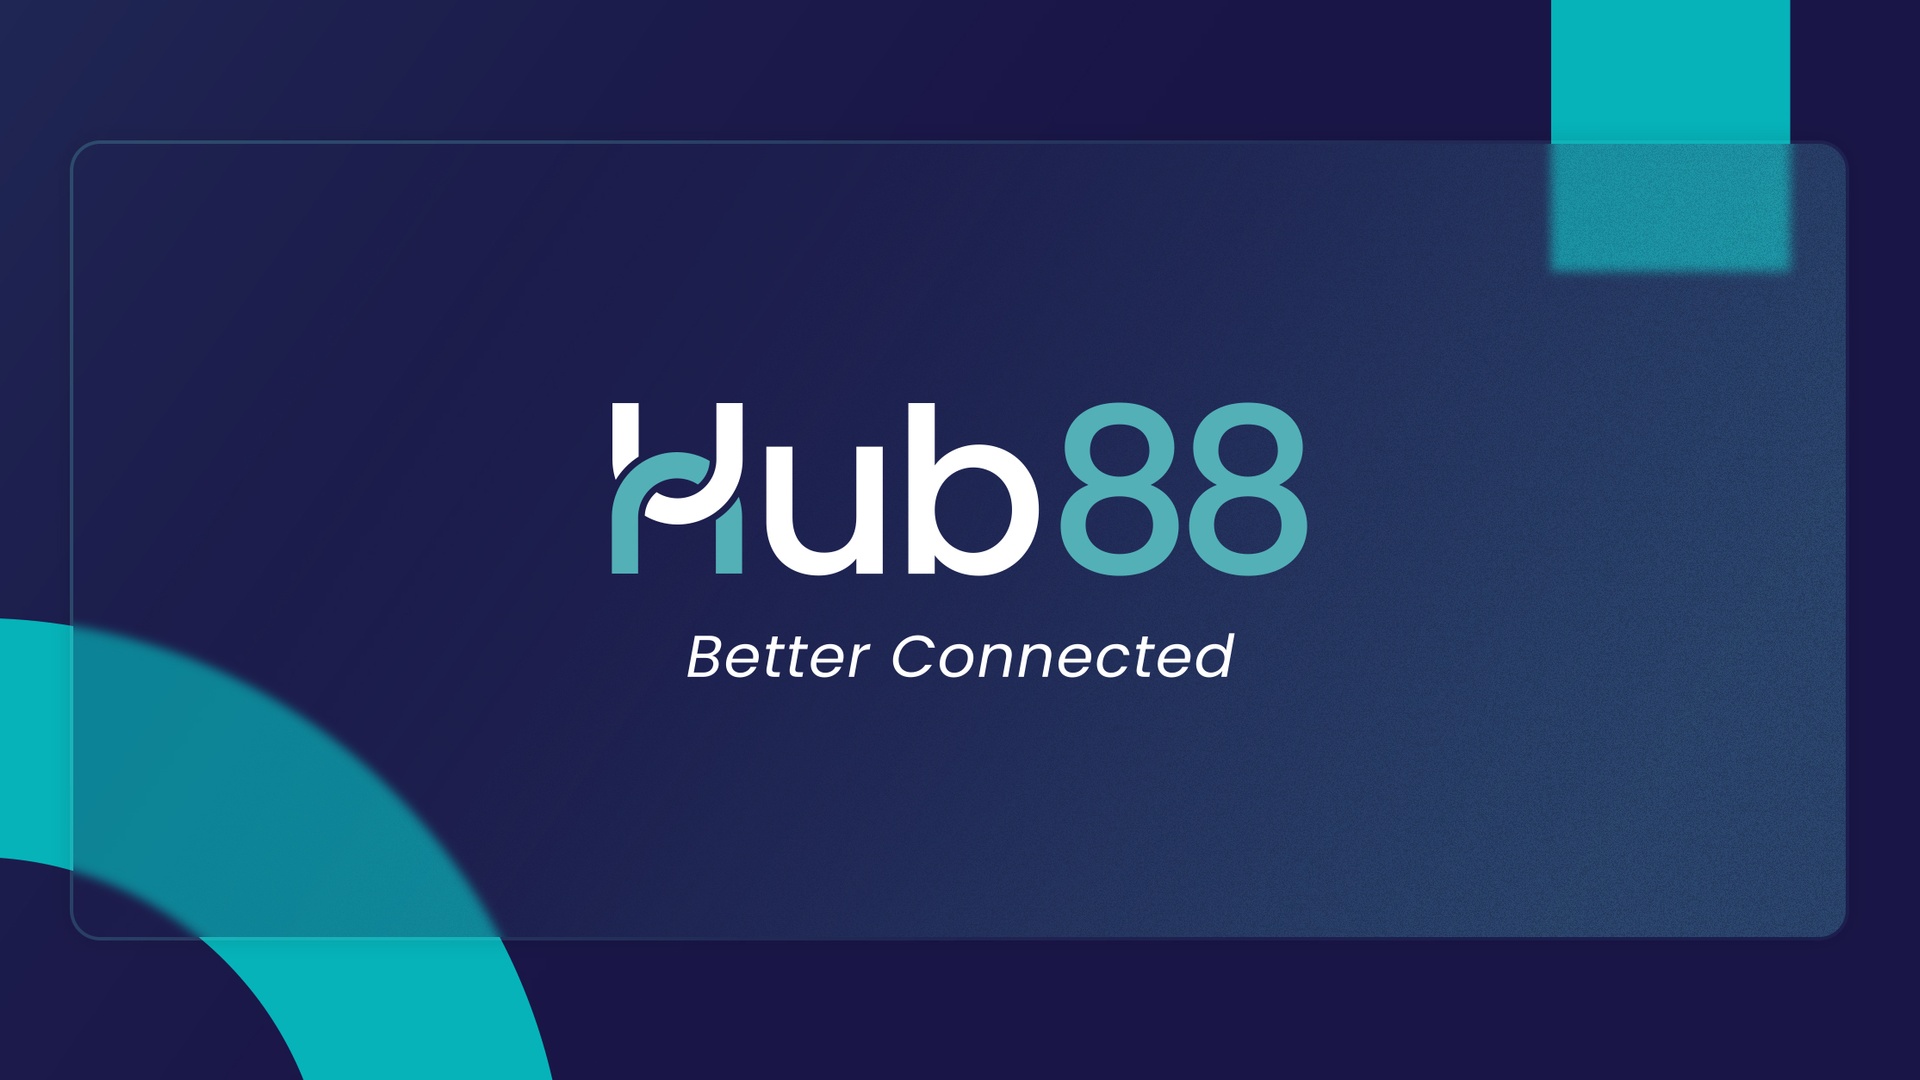 Cover Image for Hub88 – Sweepstakes Casinos